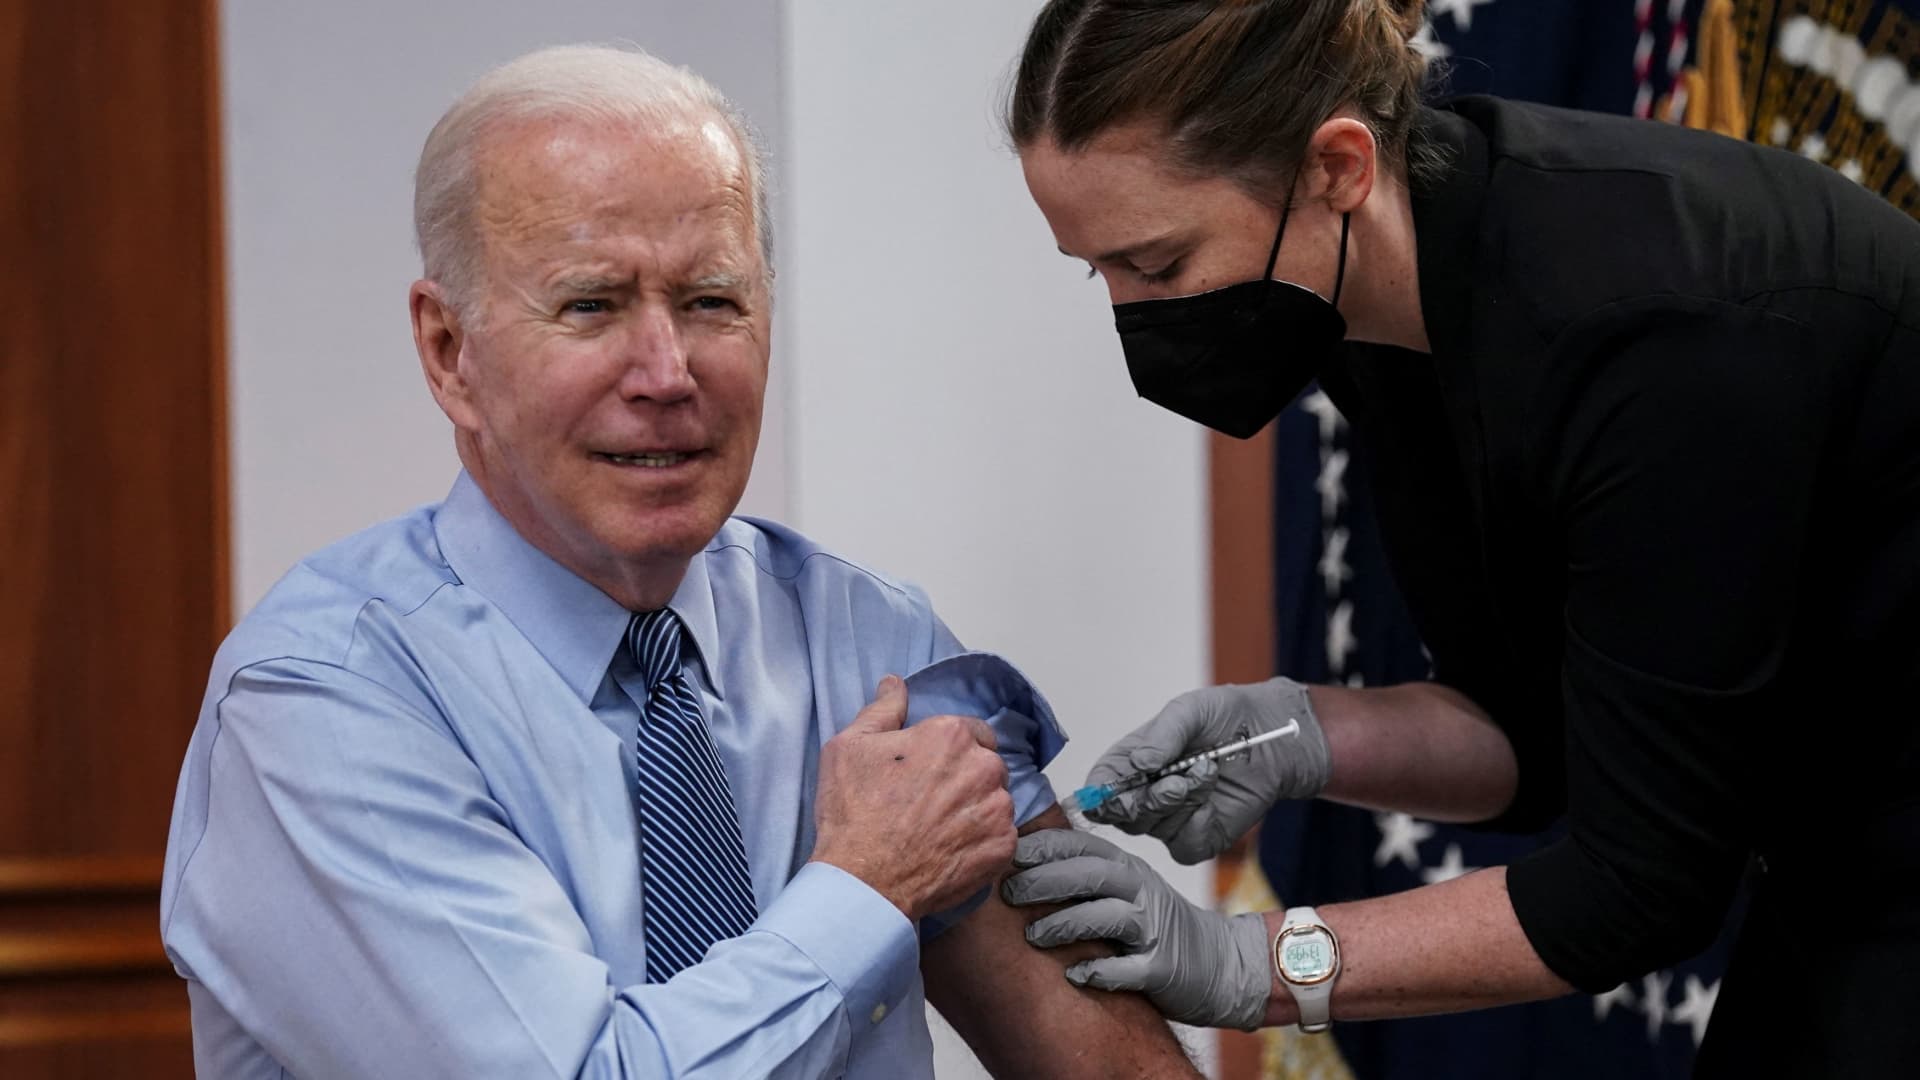 Biden warns U.S. won’t have enough Covid vaccine shots this fall if Congress fails to pass funding